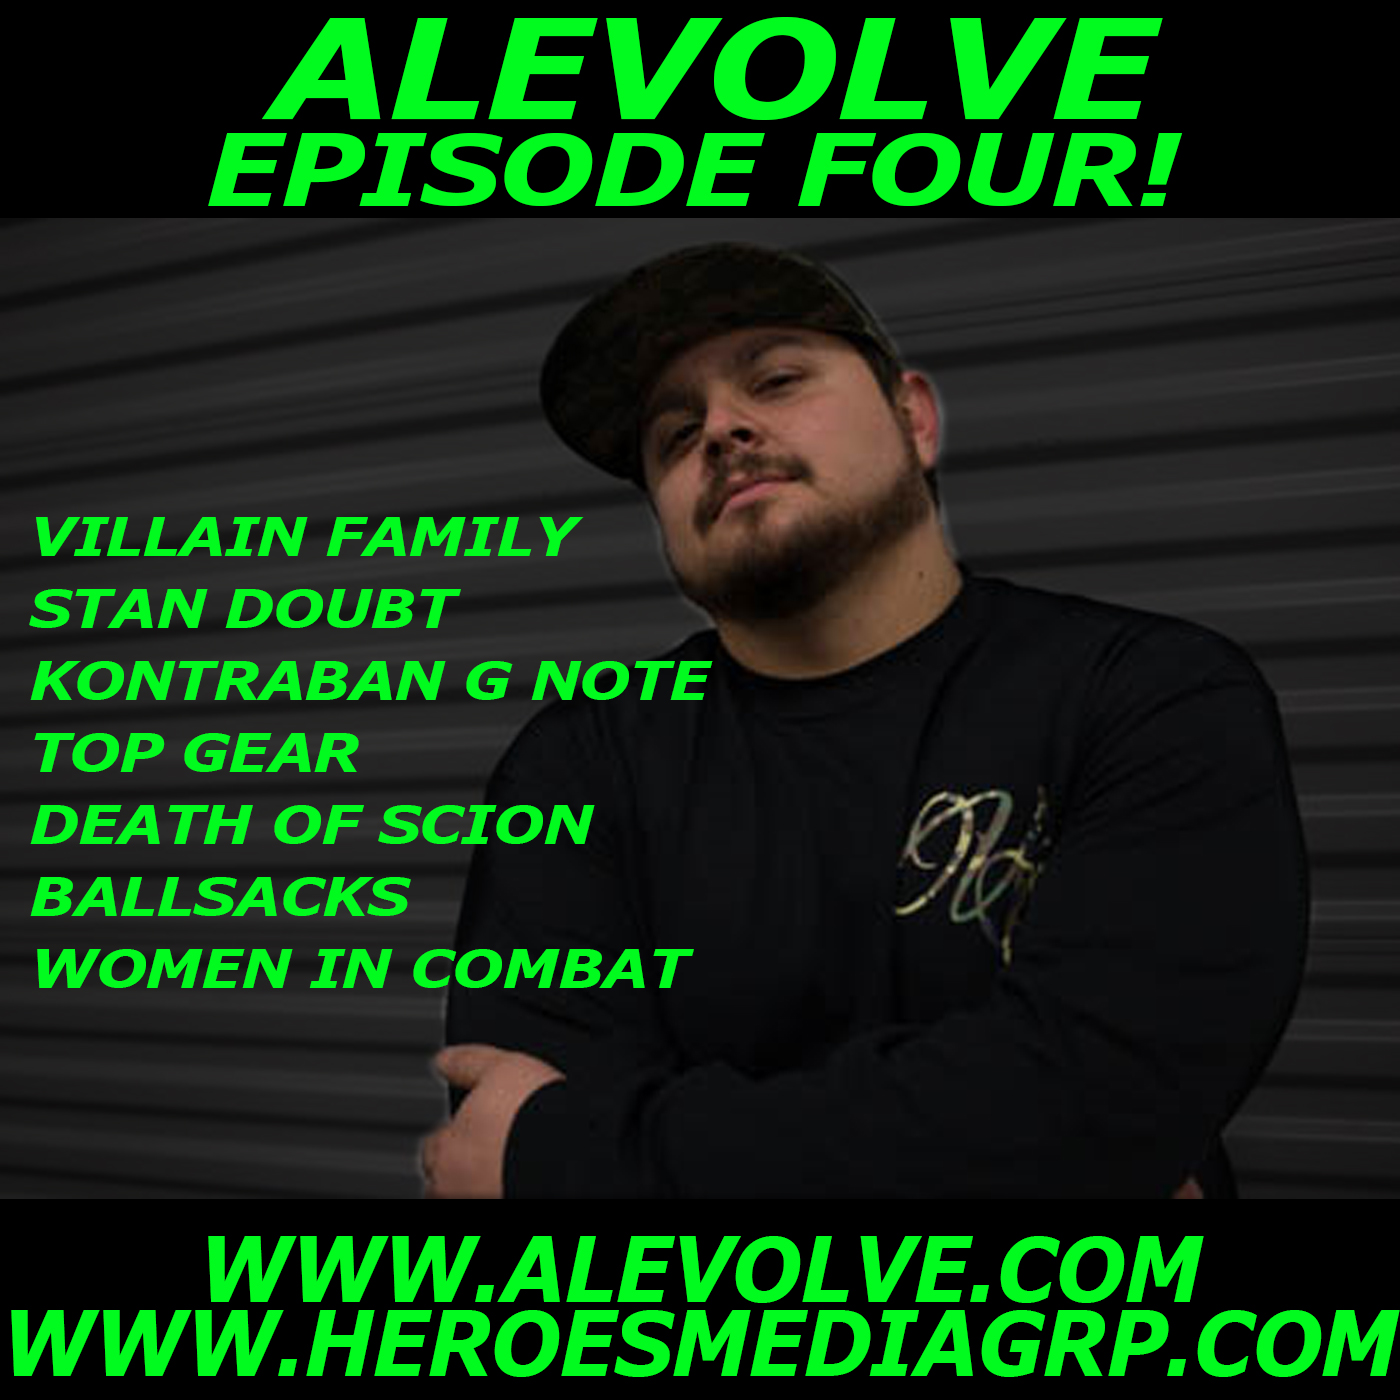 ALEVOLVE RADIO! Episode 4 - Top Gear, Scion, Balls Sacks, Stressed Out, Women in Combat